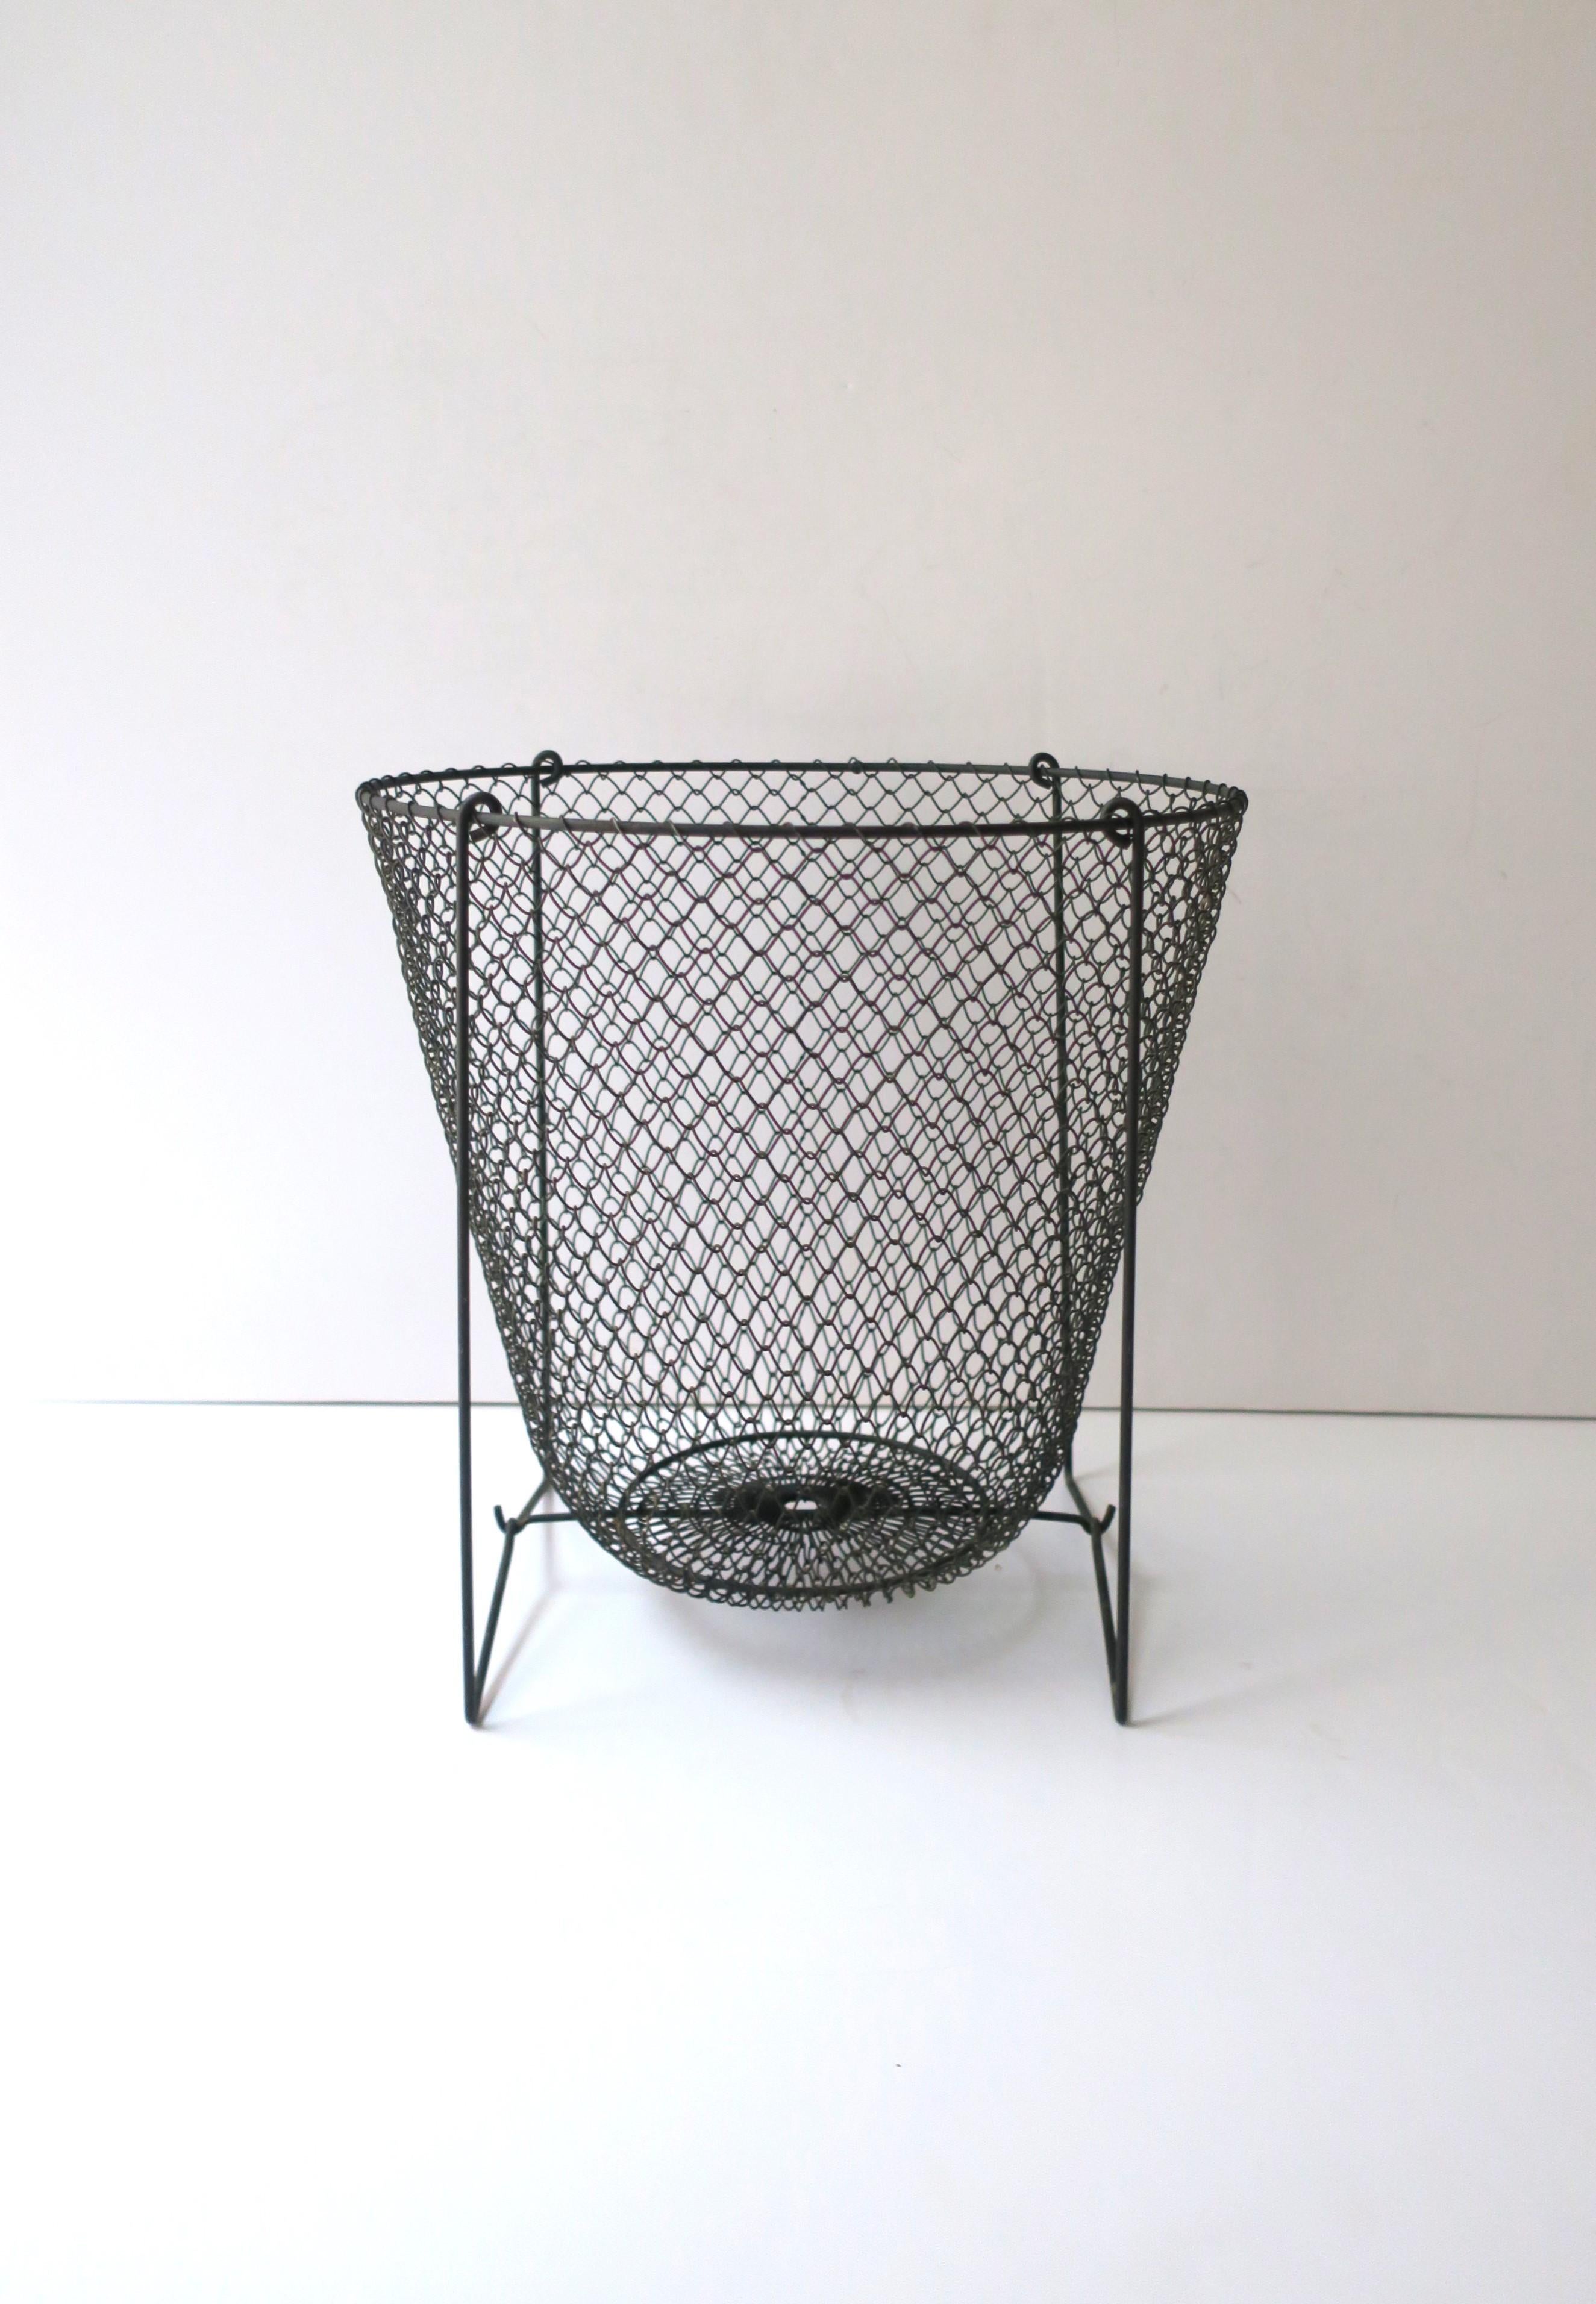 A black wire metal mesh wastebasket trash can, circa late 20th century. In the Midcentury Modern Industrial style. Very good condition as shown in images. Dimensions: 11.75